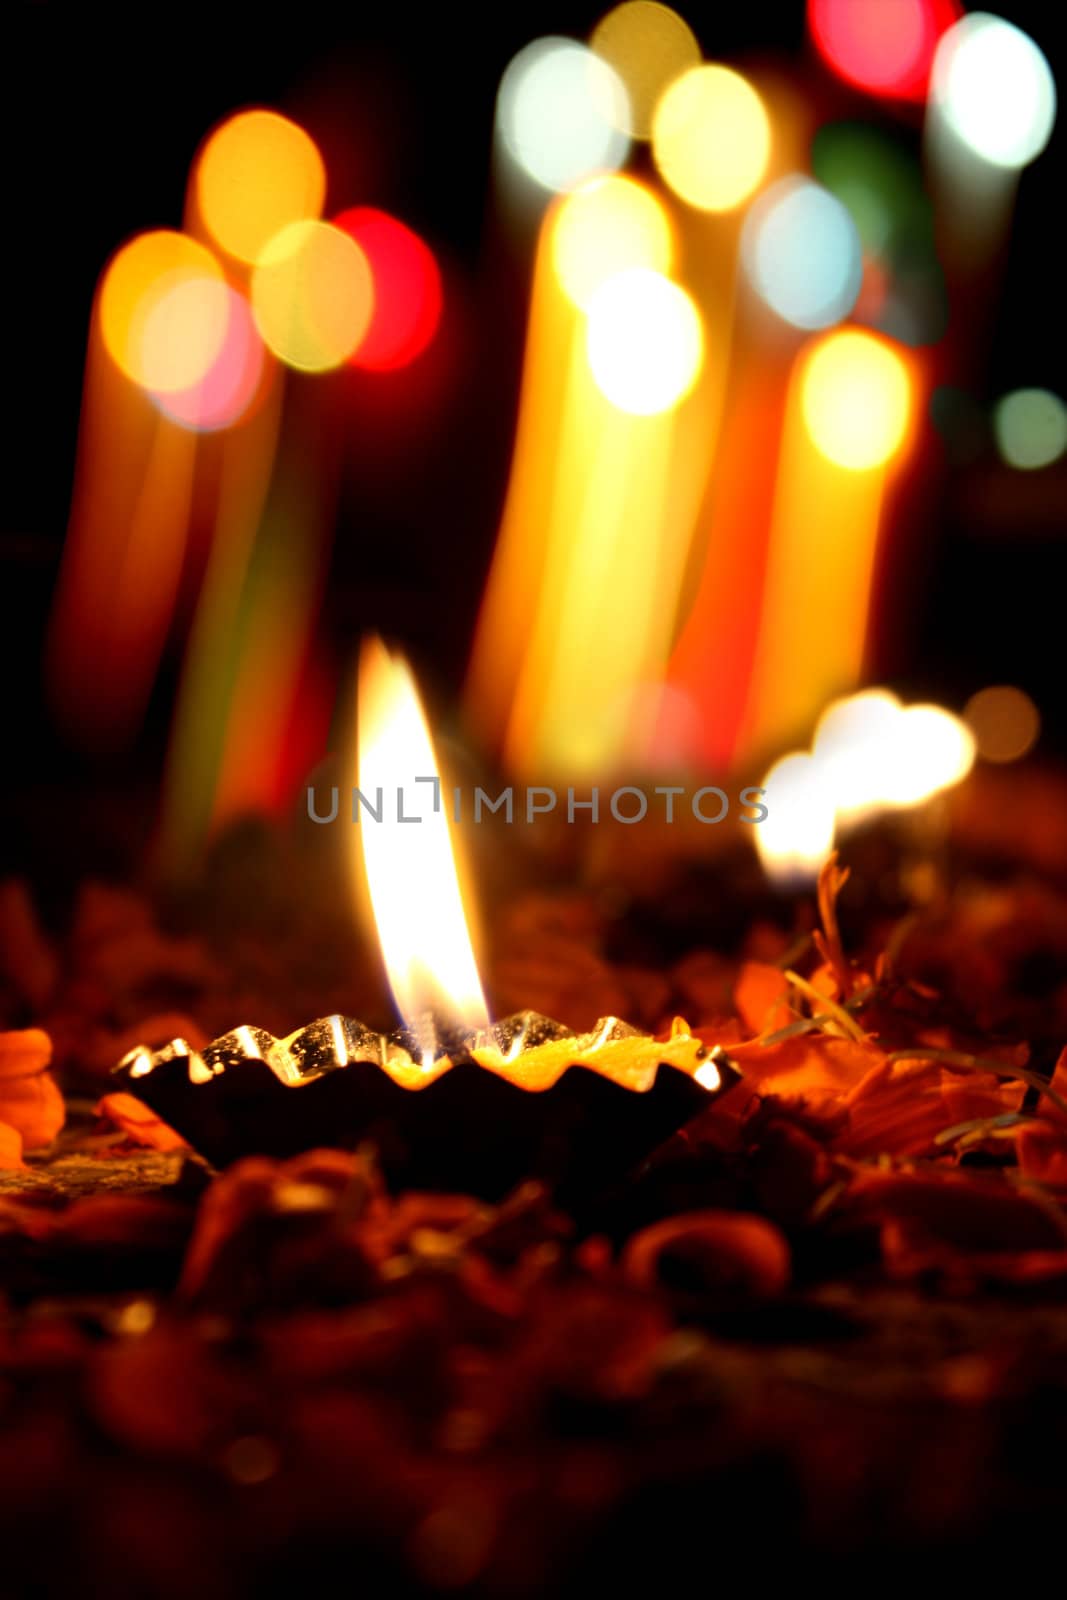 Beautiful lamps traditionally lit on the occassion of Diwali festival in India.